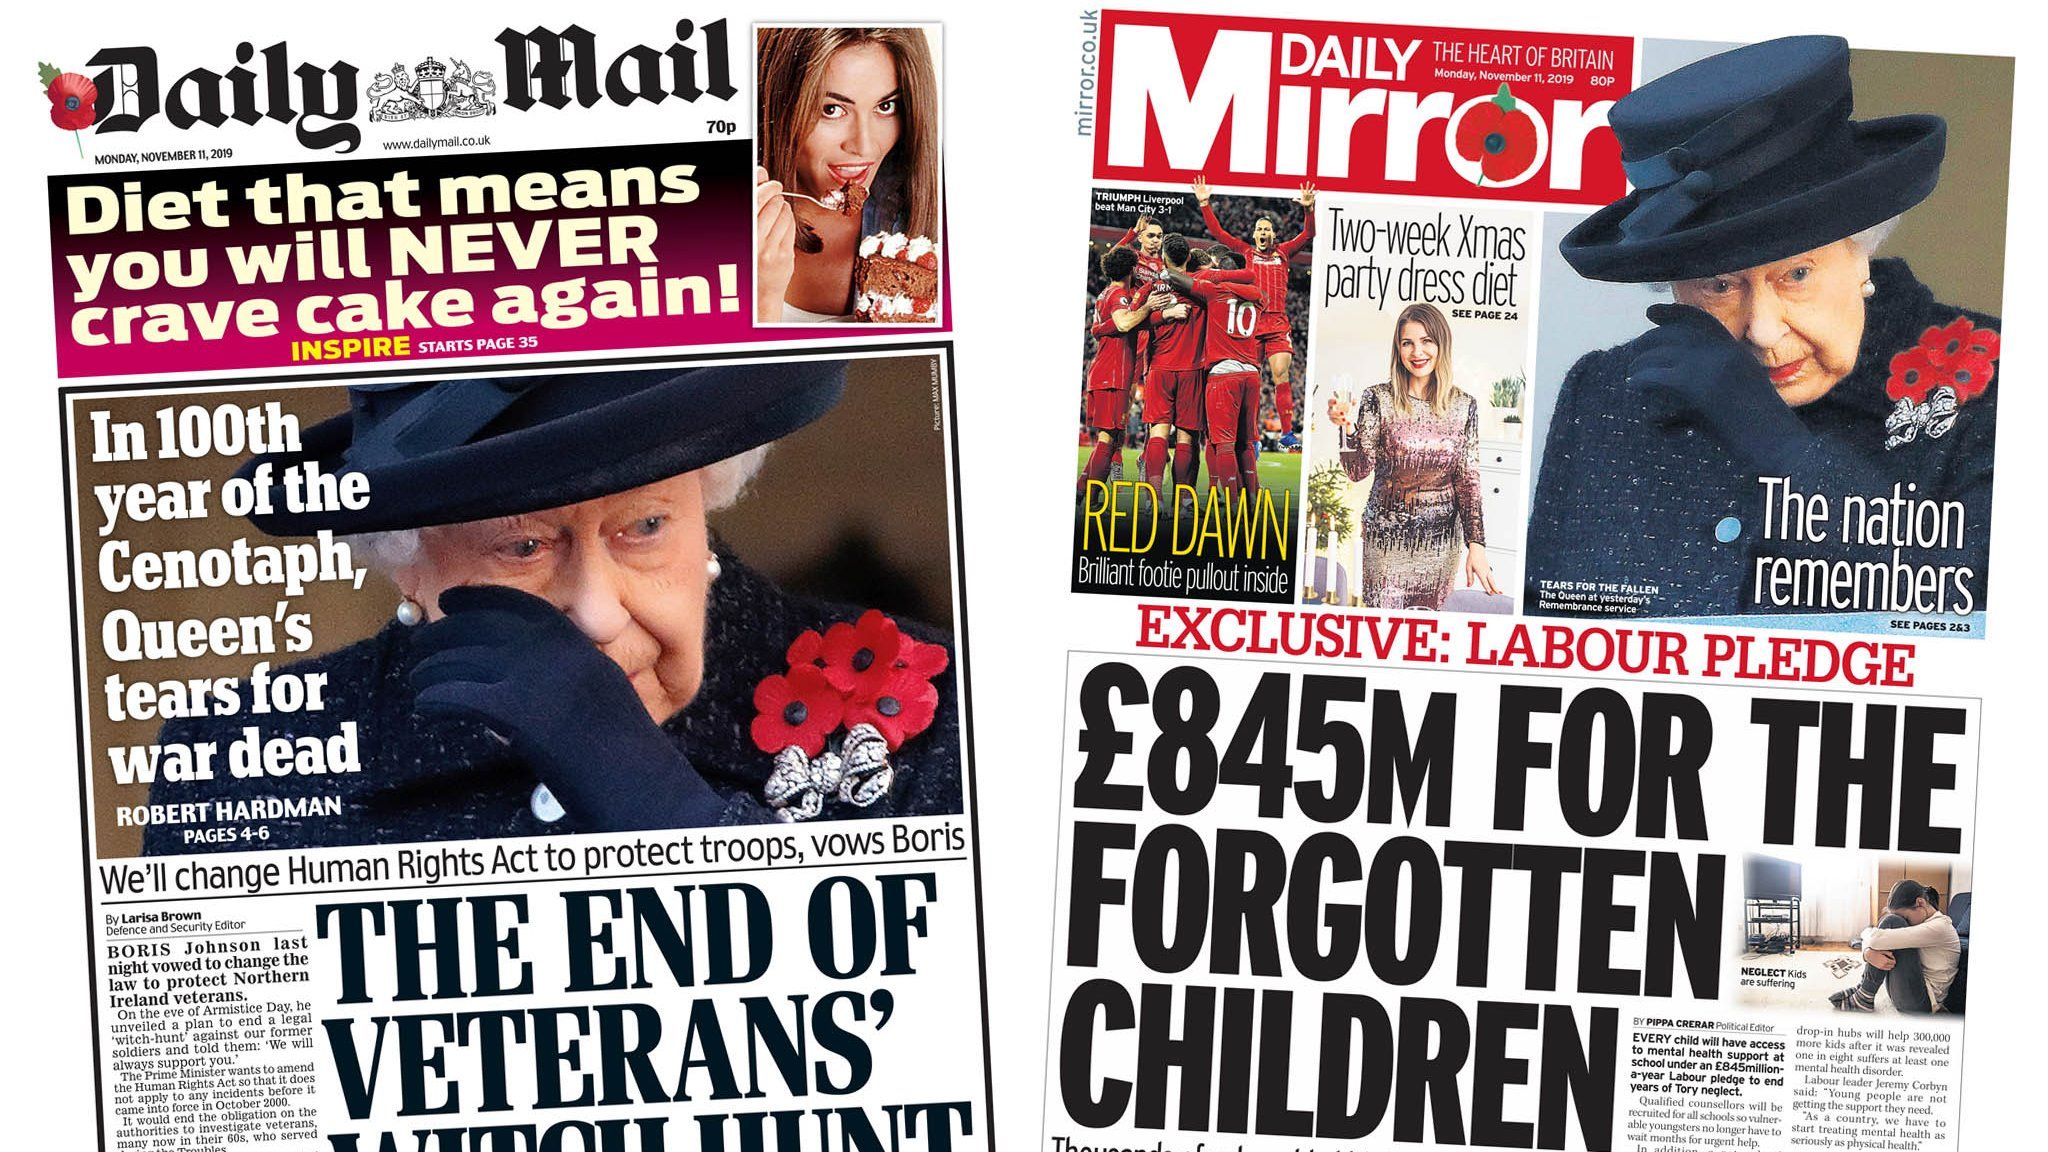 Daily Mail and Daily Mirror